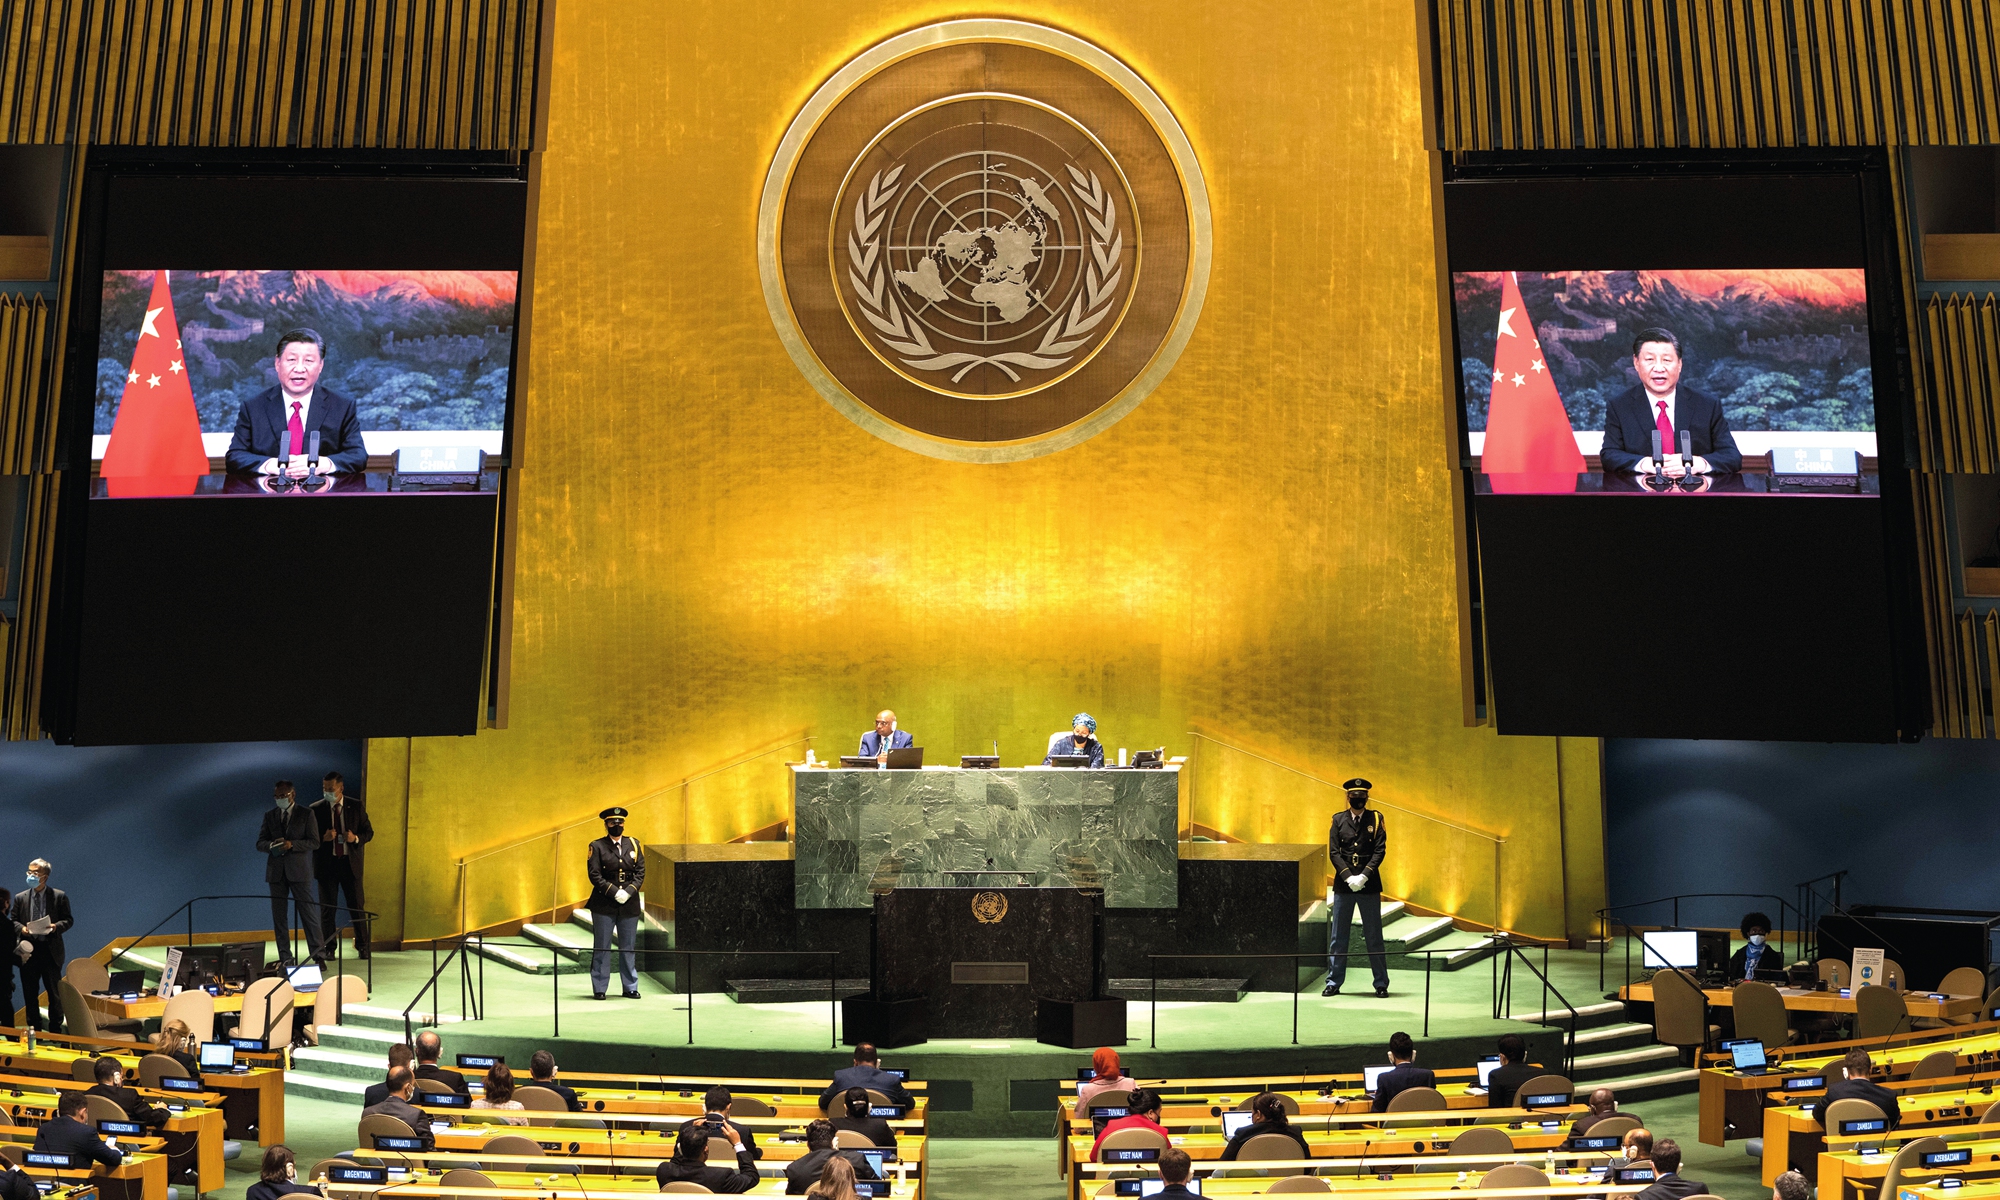 Chinese President Xi Jinping on Tuesday addresses the general debate of the 76th session of the United Nations General Assembly via video, calling for jointly addressing global threats and challenges to build a better world for all. Photo: Xinhua